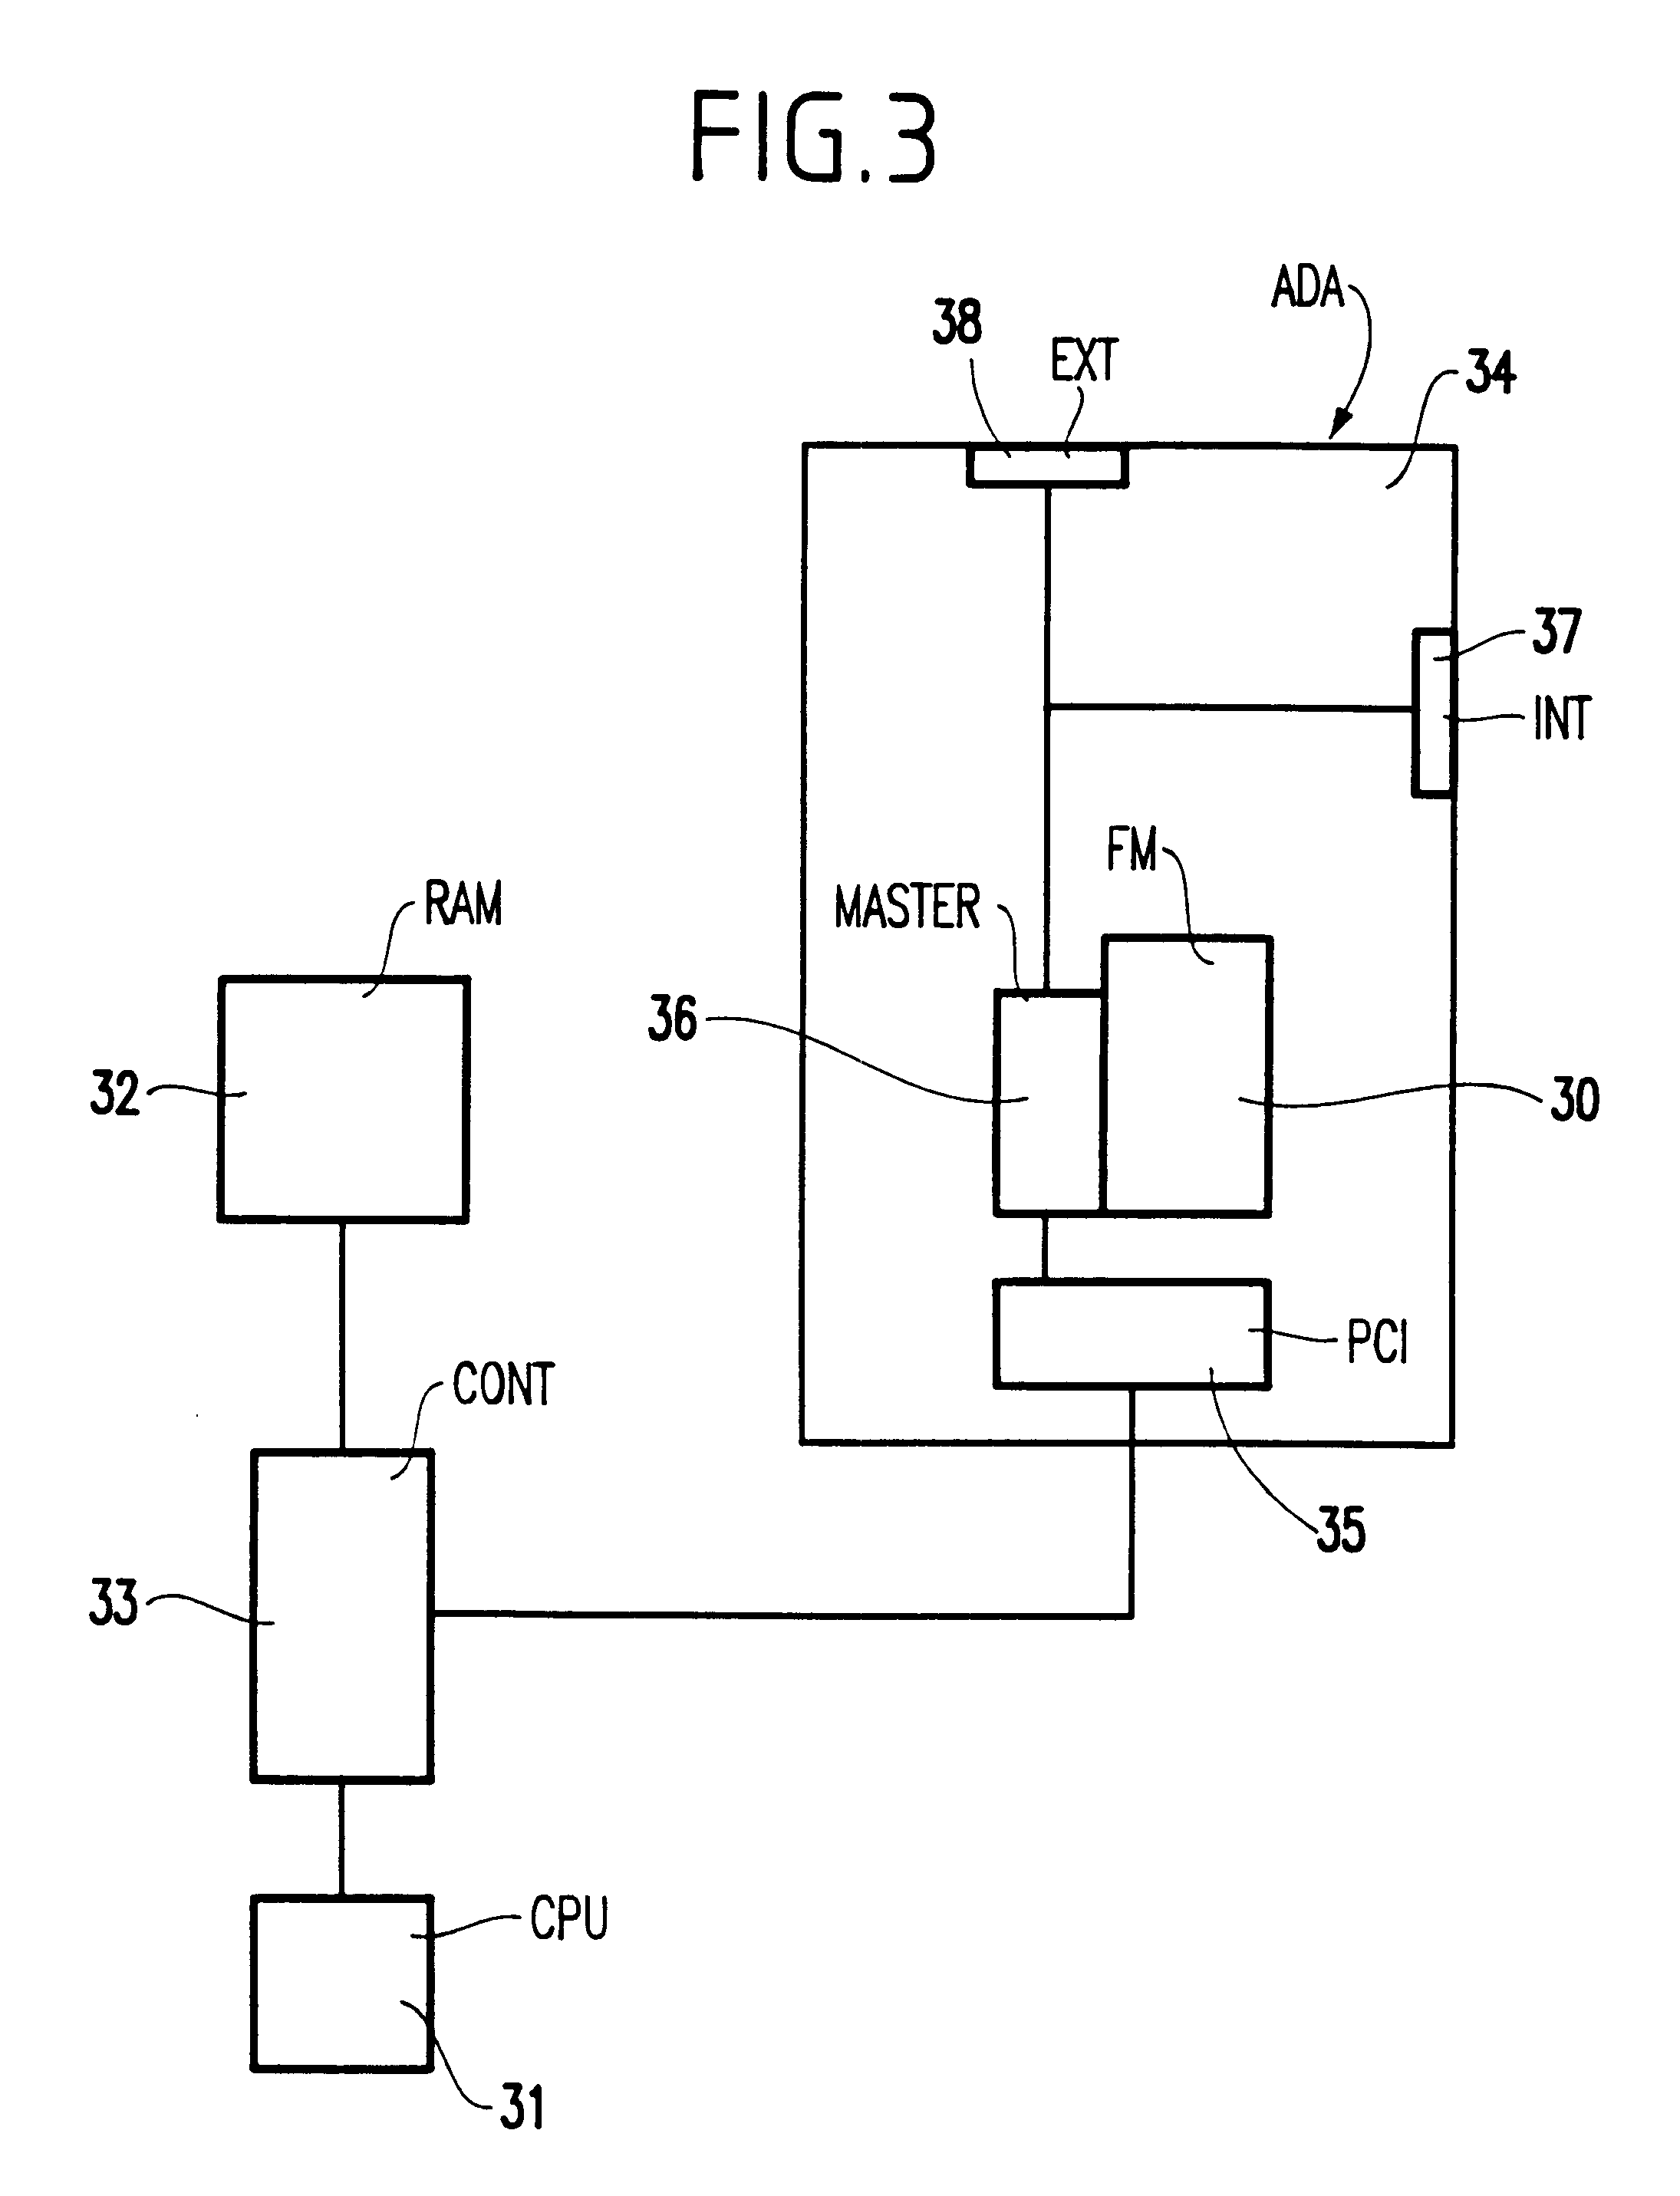 Apparatus for keeping several versions of a file